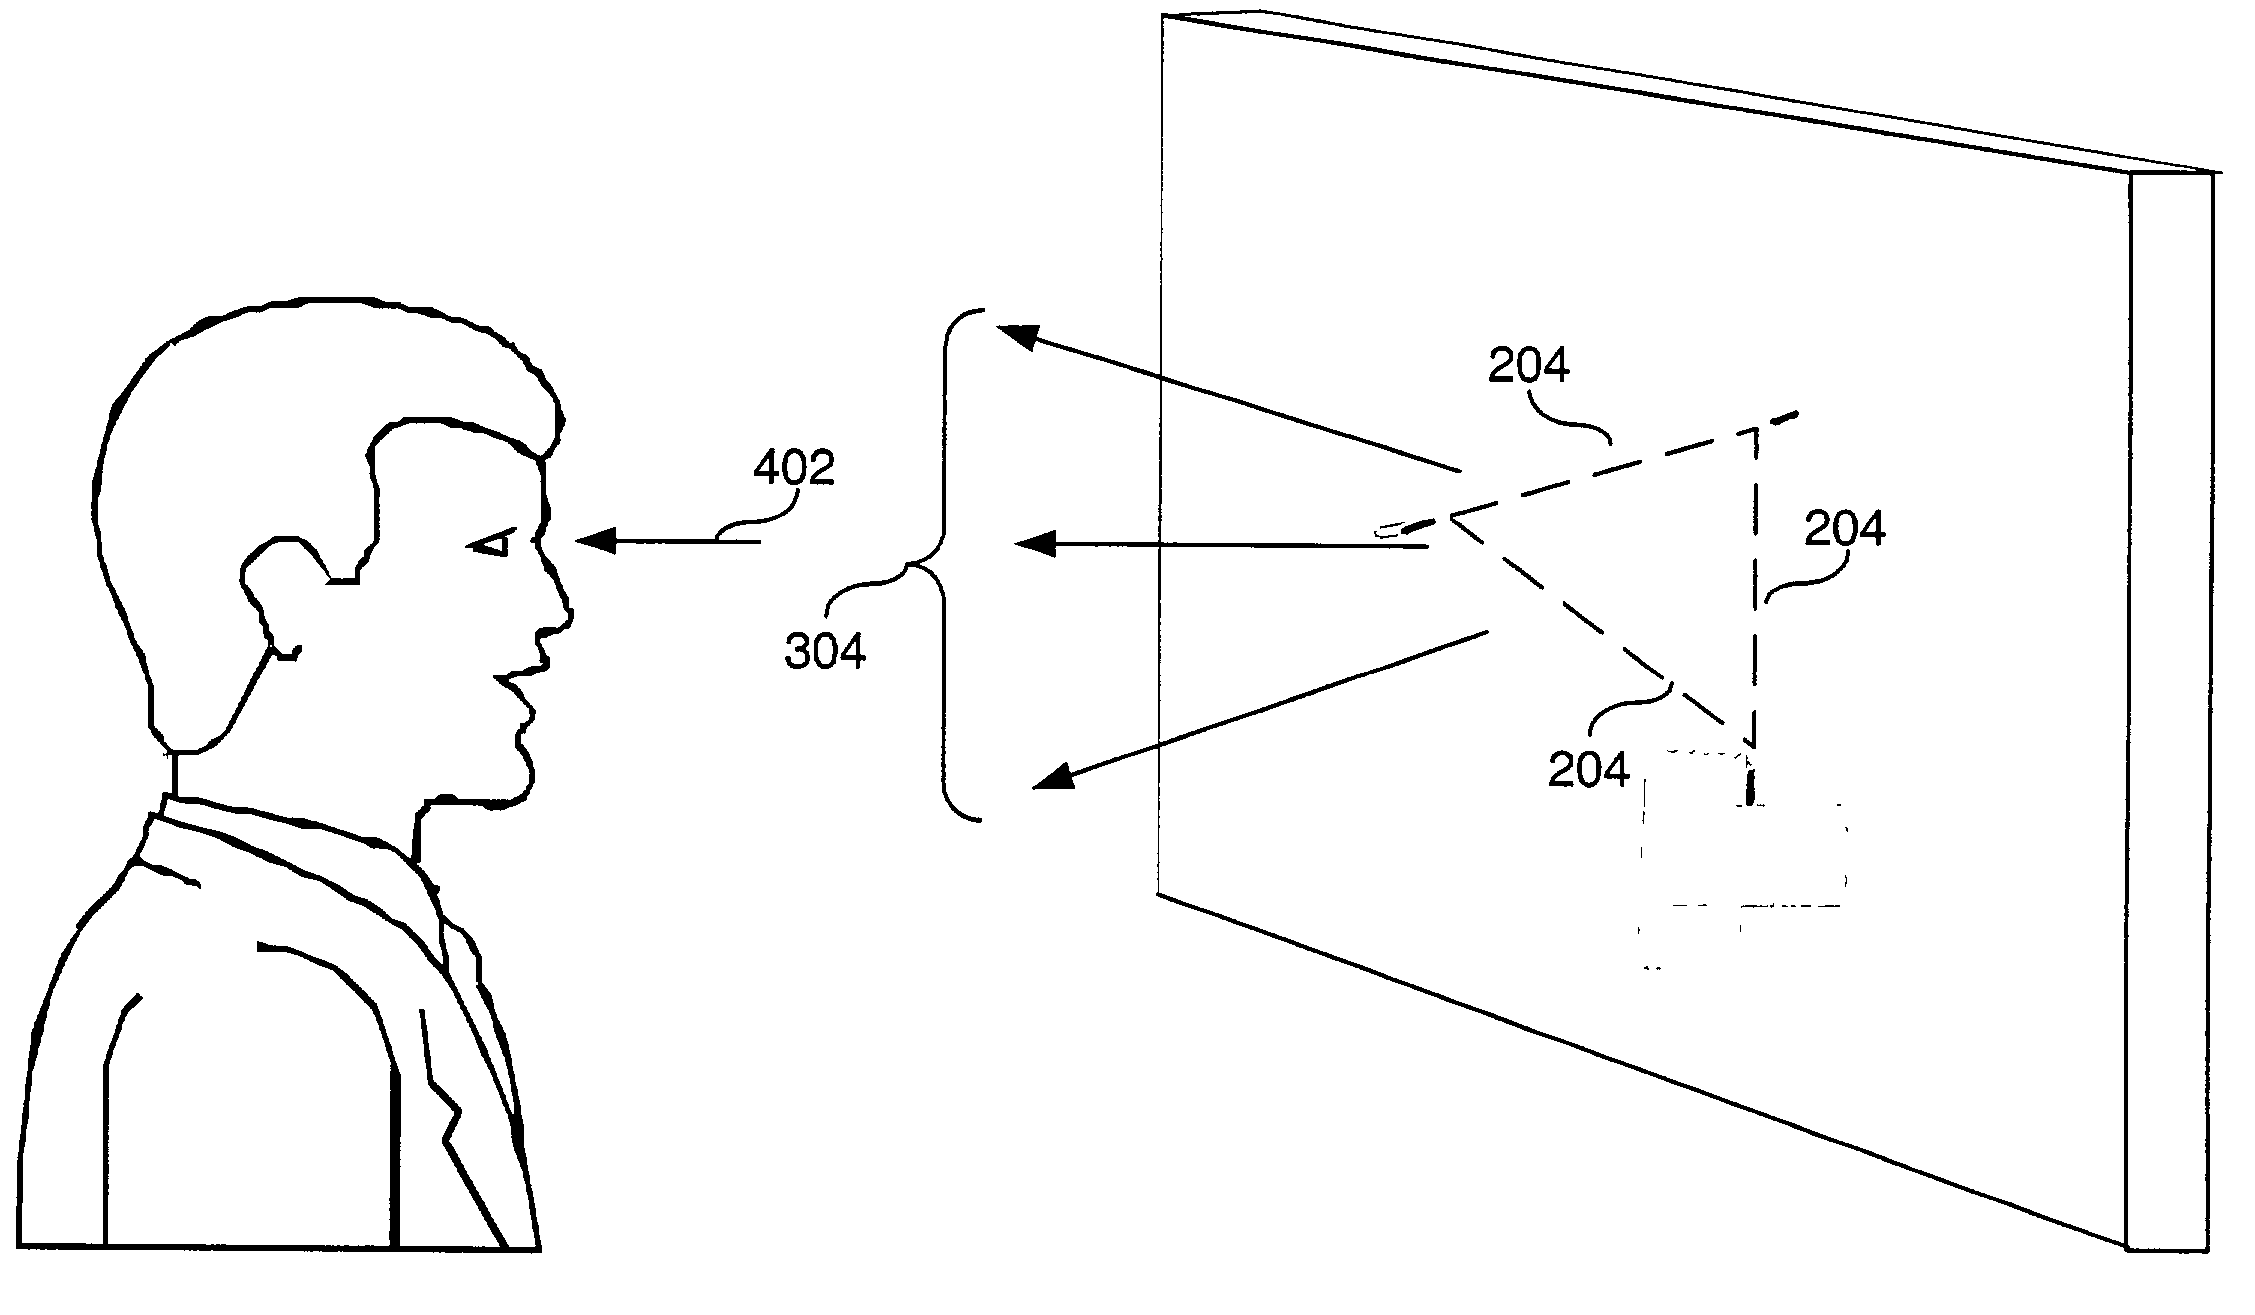 Apparatus, method and computer program product to facilitate ordinary visual perception via an early perceptual-motor extraction of relational information from a light stimuli array to trigger an overall visual-sensory motor integration in a subject